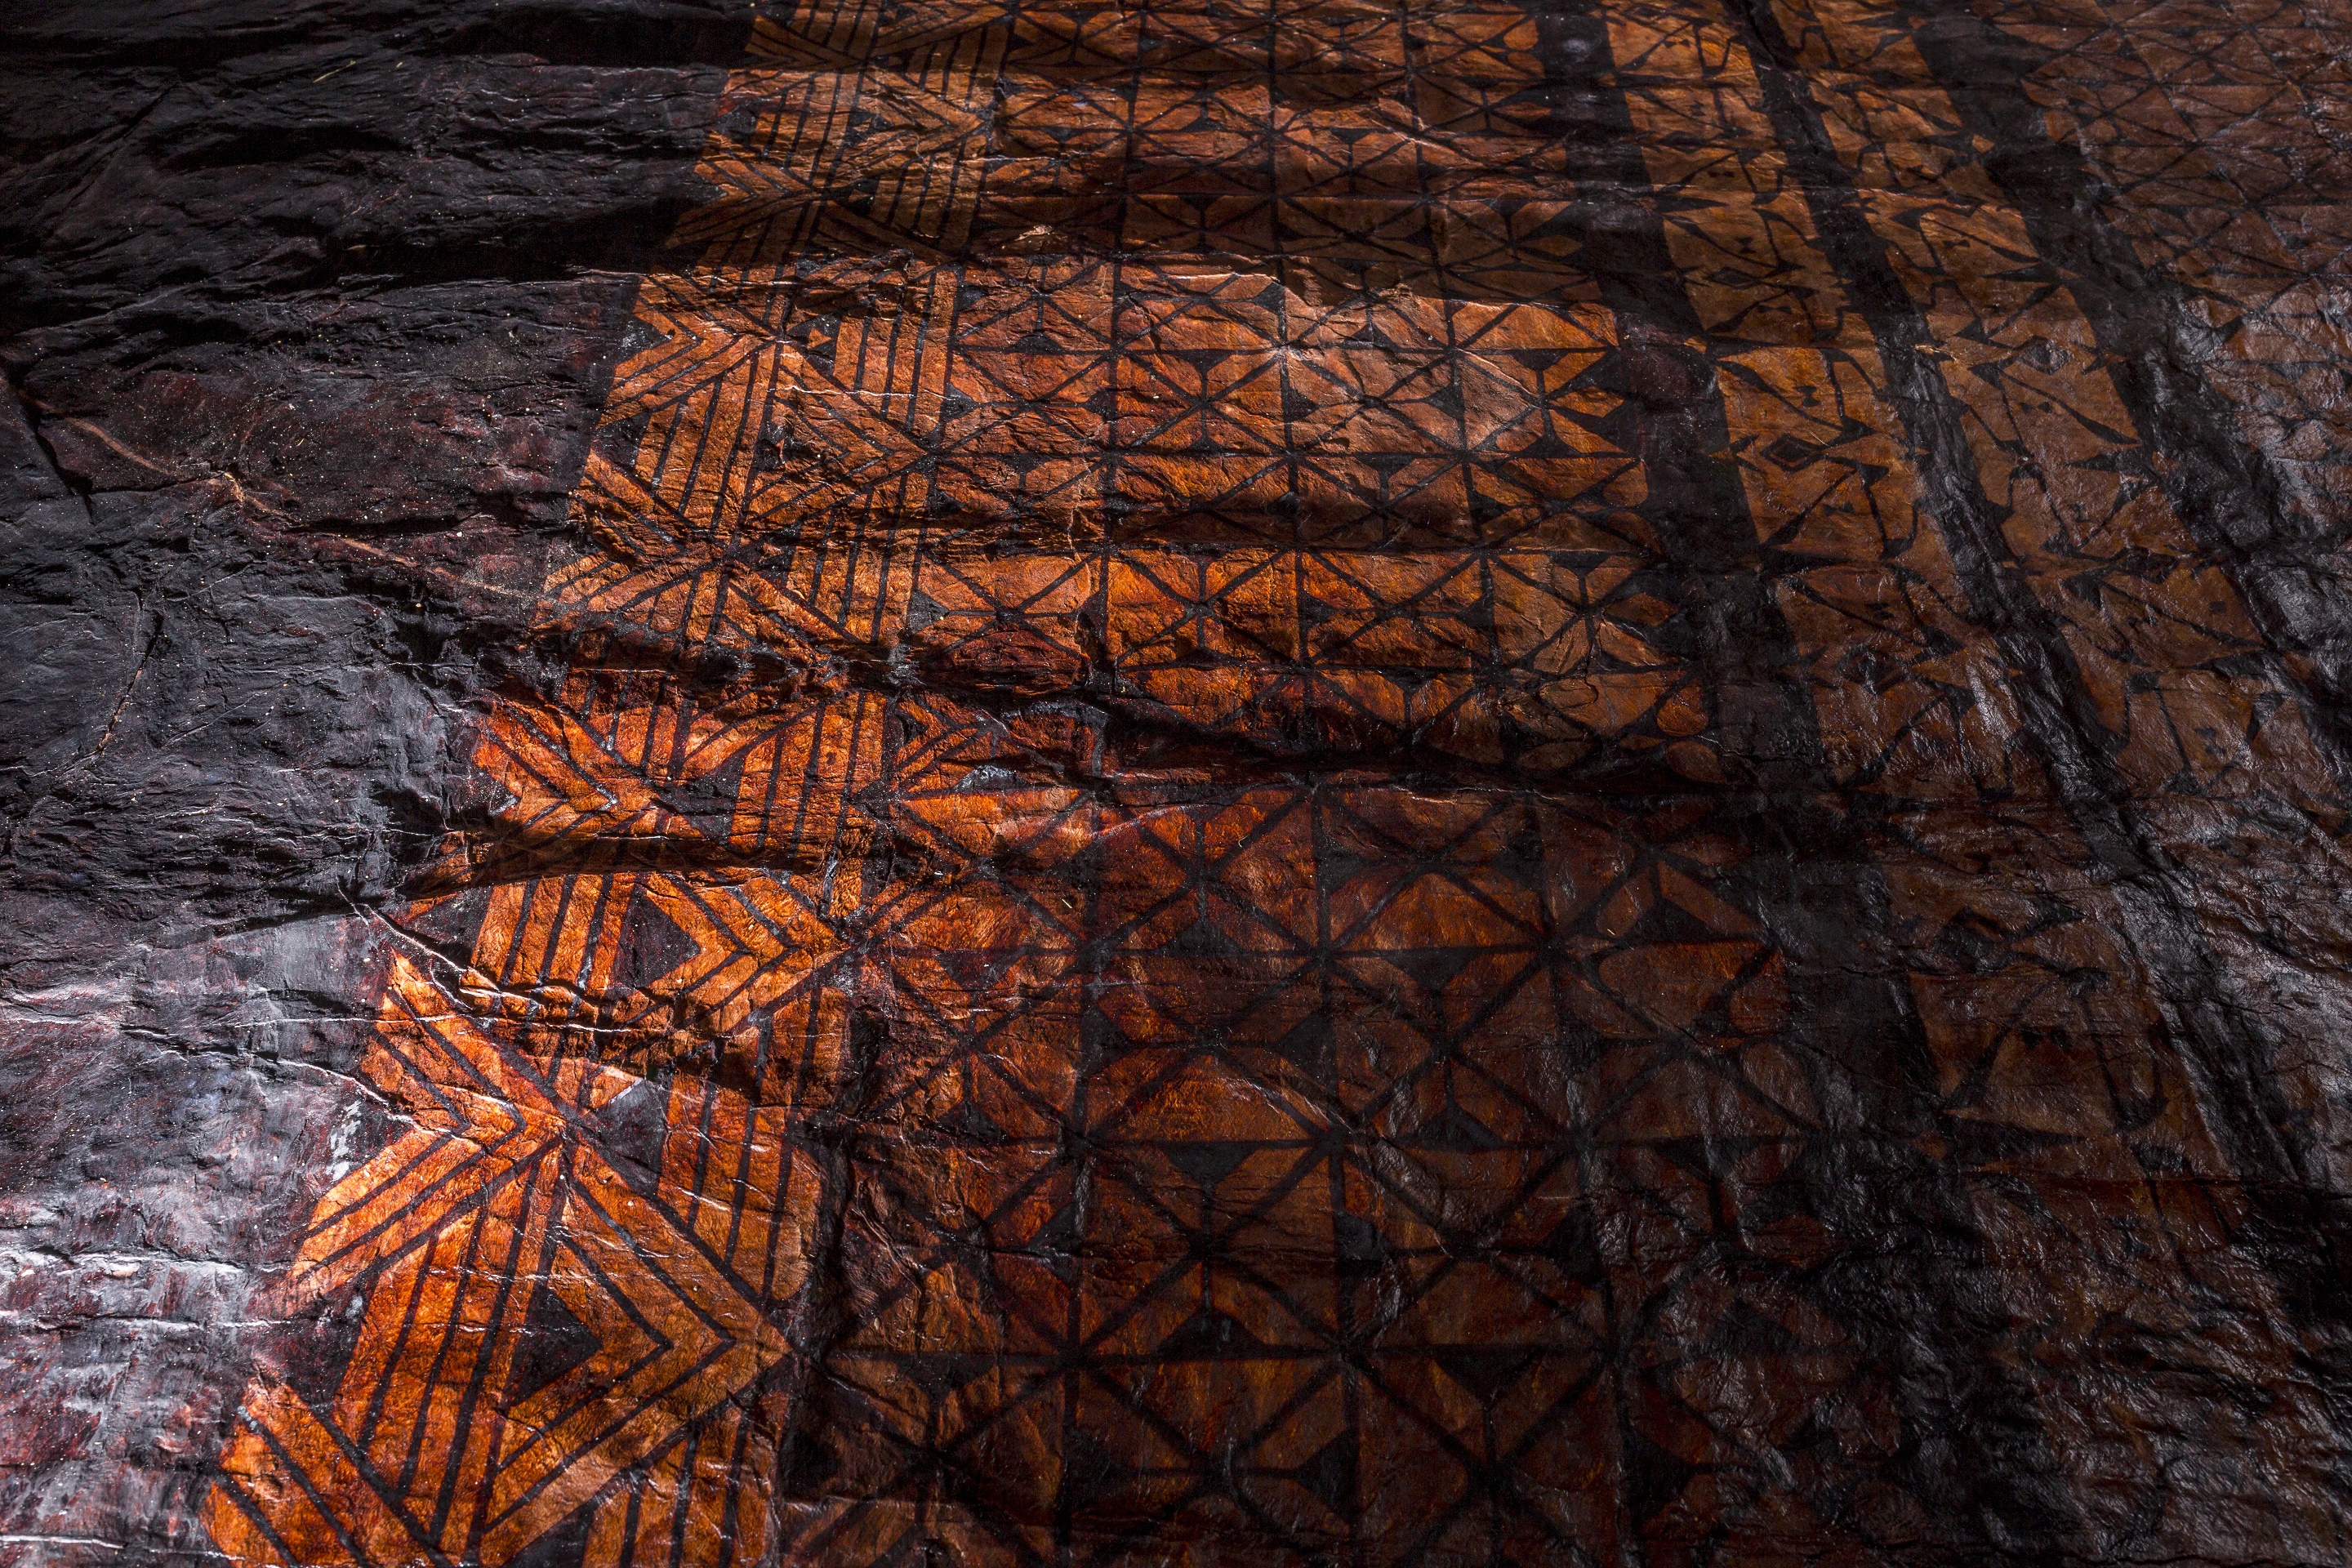 Lototō1 2016 (detail). Earth pigments, natural dyes and tuitui (Candlenut soot) on ngatu (barkcloth). Image courtesy - the artist. Photograph - Arnaud Elissalde